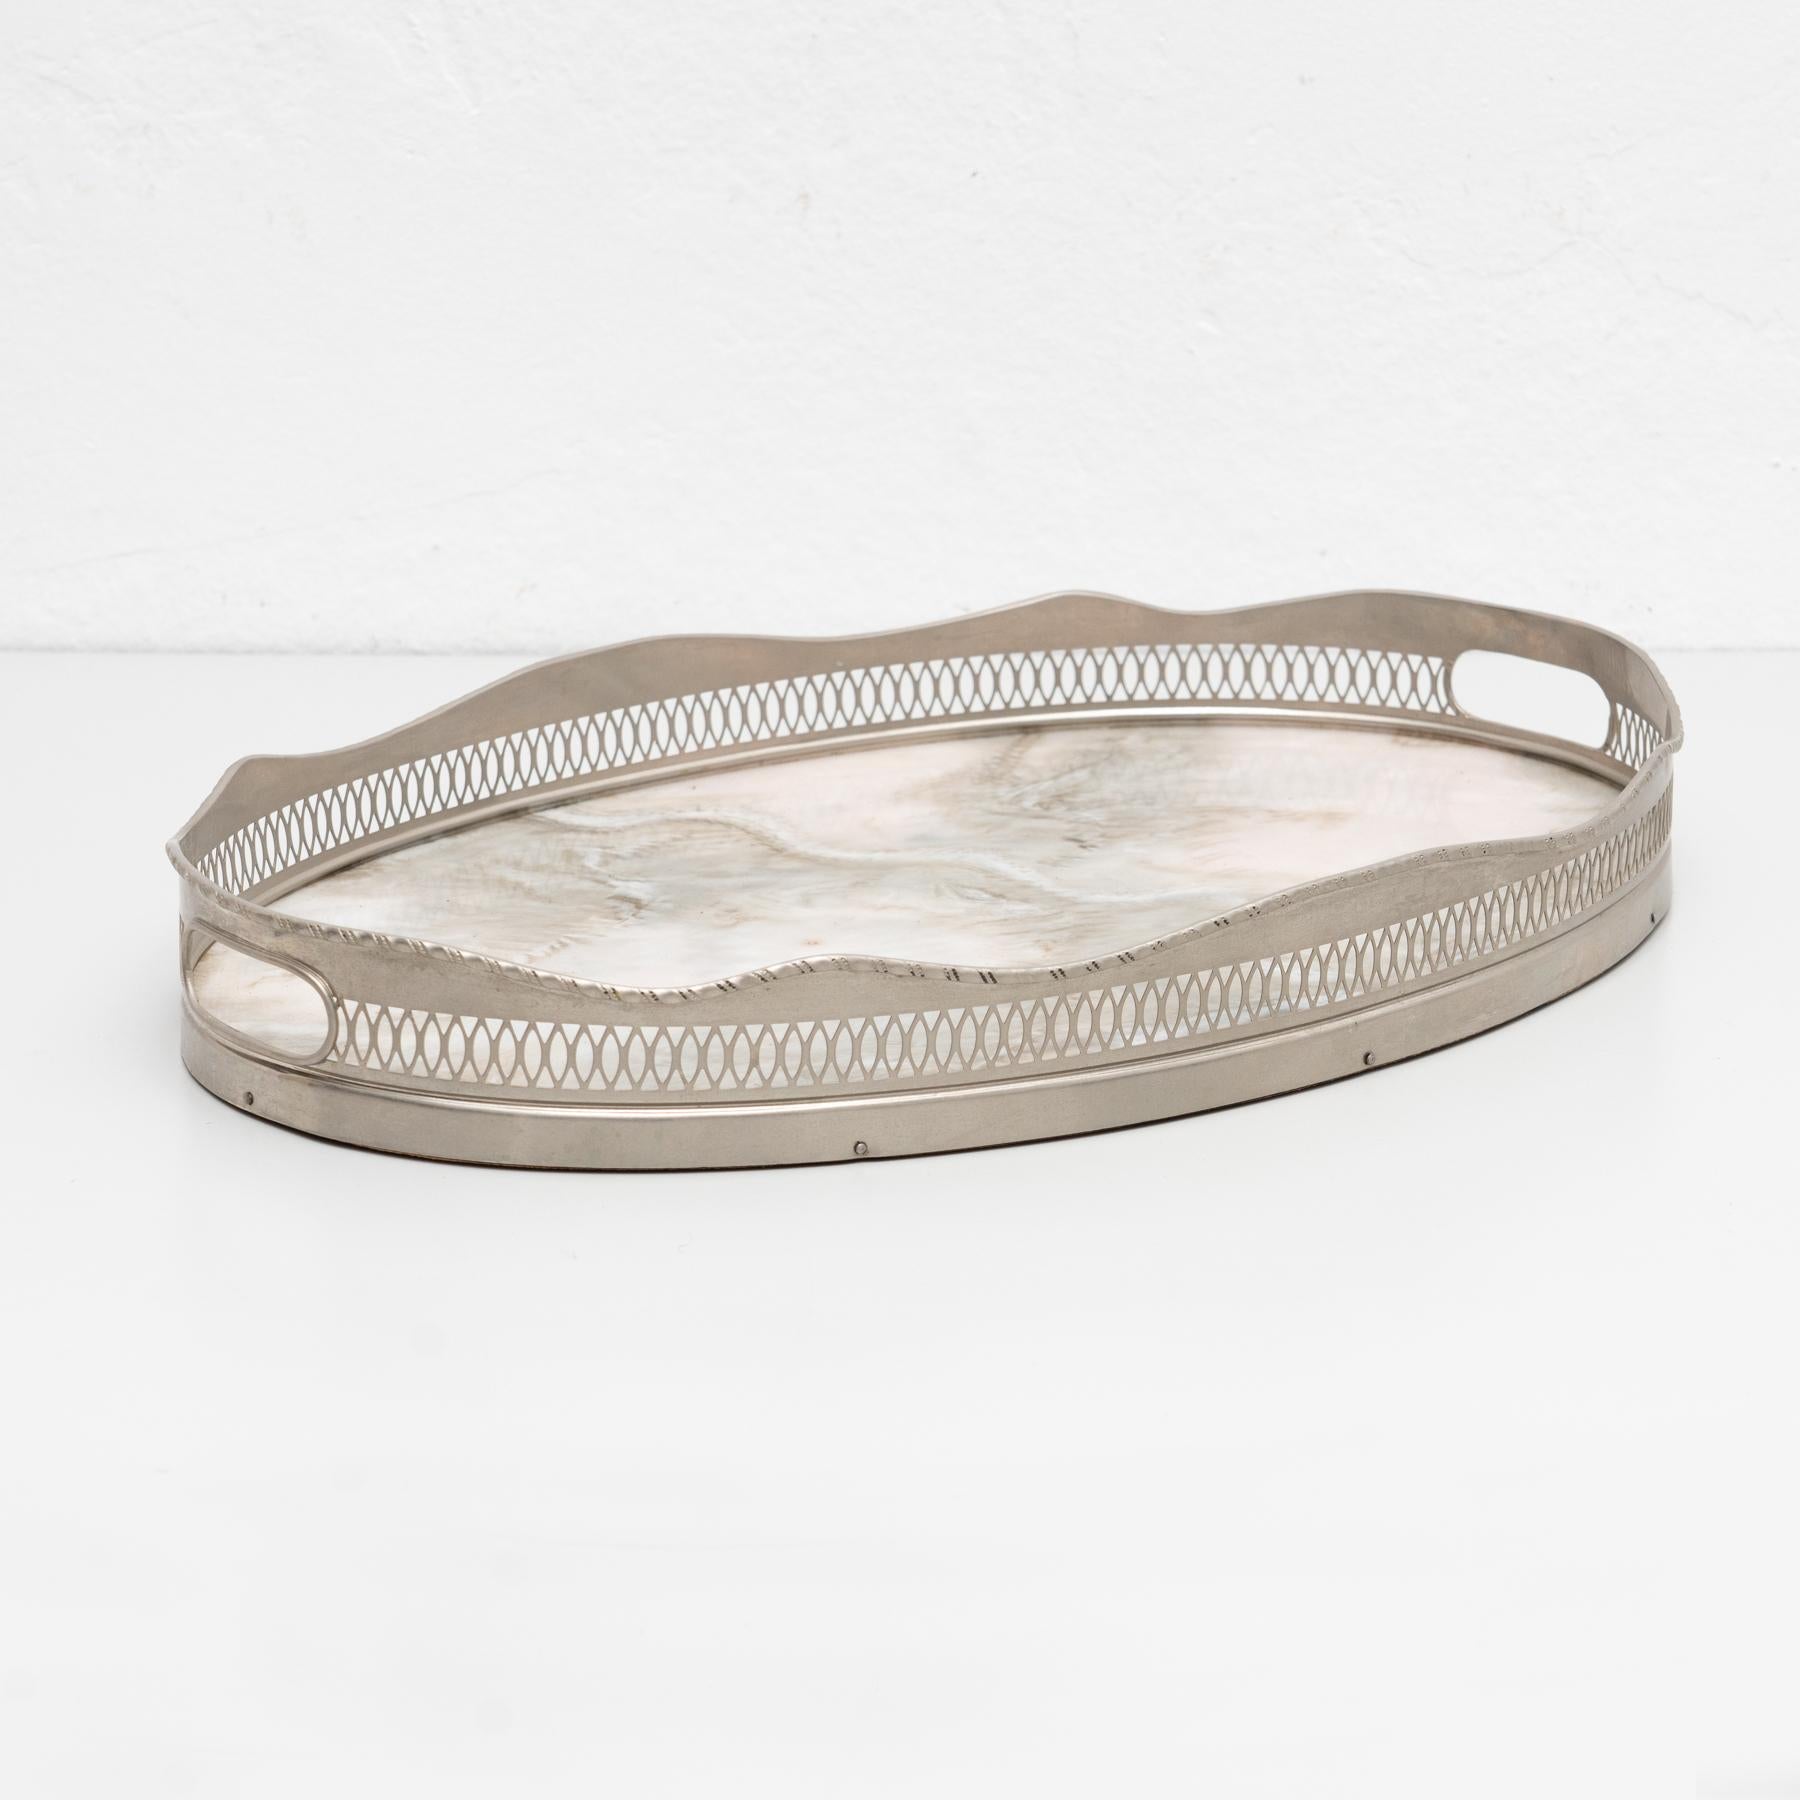 Mid-Century Modern decorative metal tray, by an unknown designer.
Manufactured in Spain, circa 1950.

In good original condition, with minor wear consistent with age and use, preserving a beautiful patina.

Materials:
Metal.